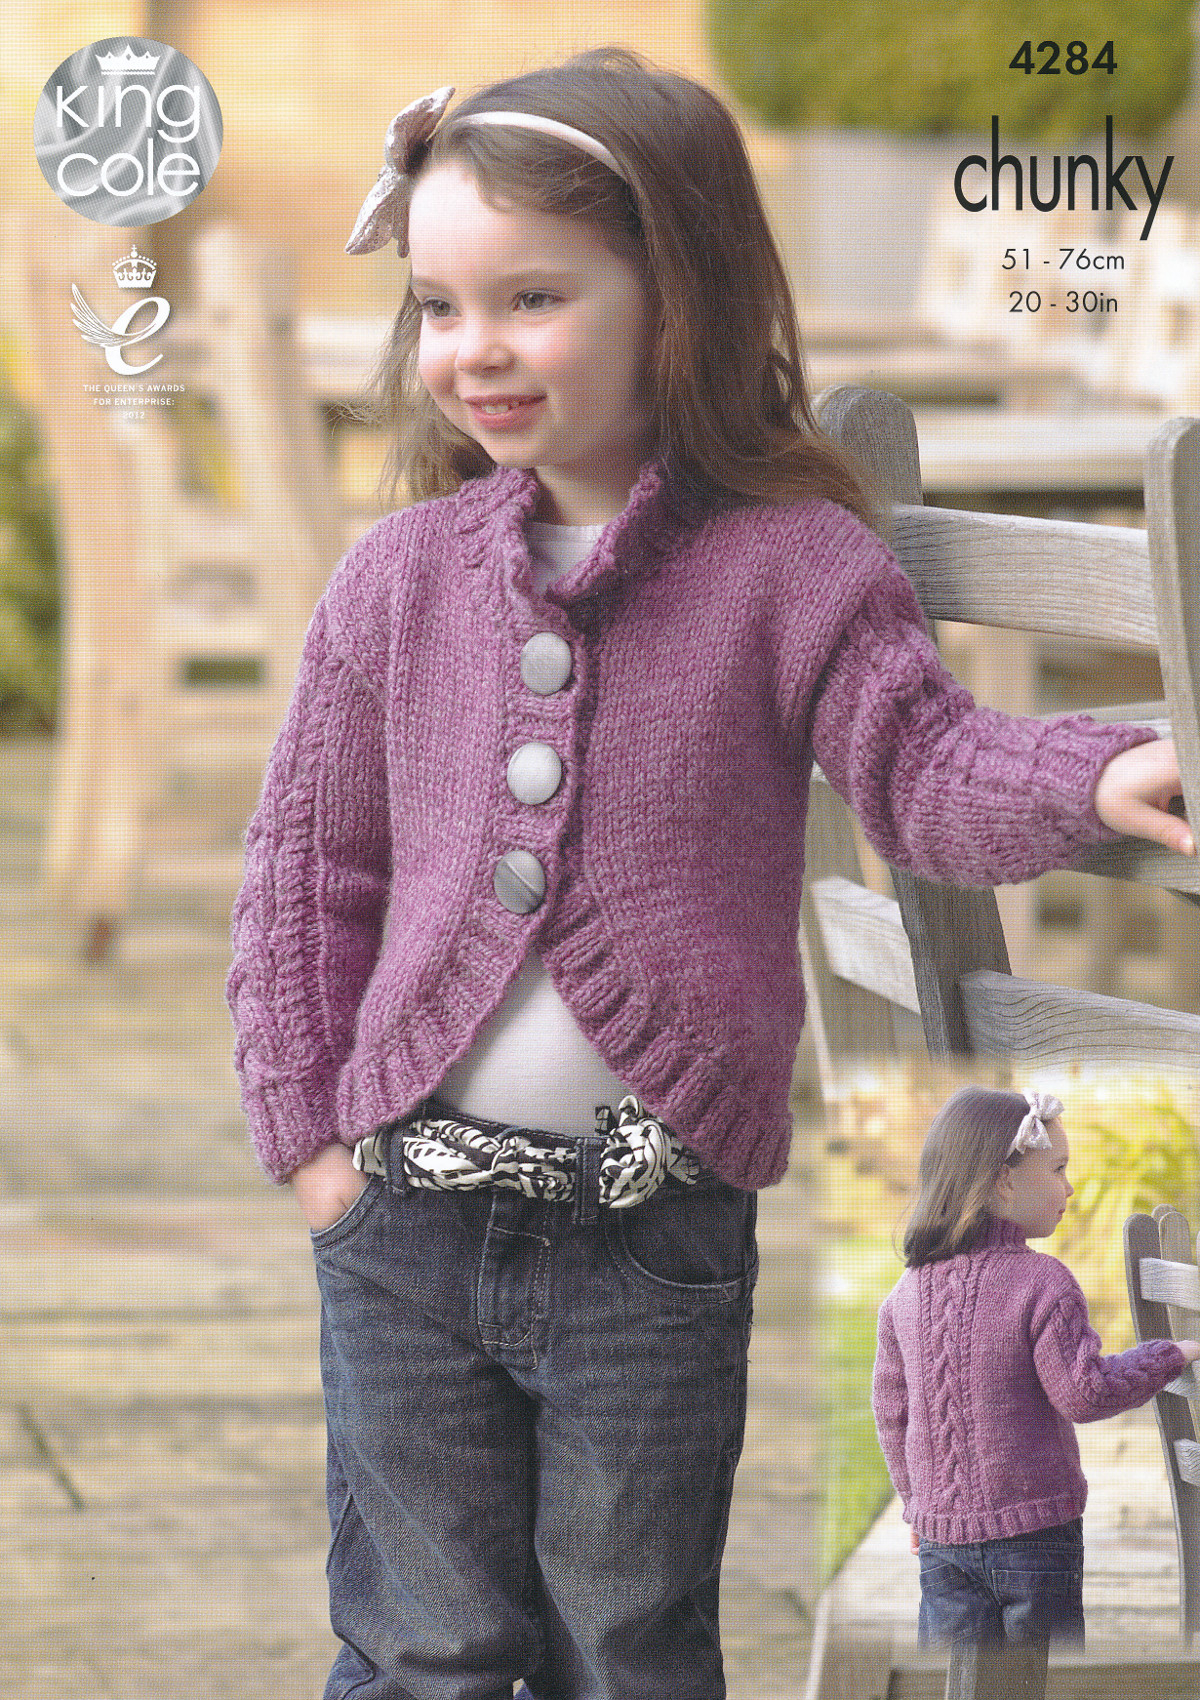 Knitted Childrens Sweaters Free Patterns Details About Kids Chunky Knitting Pattern King Cole Childrens Collar V Neck Cardigans 4284